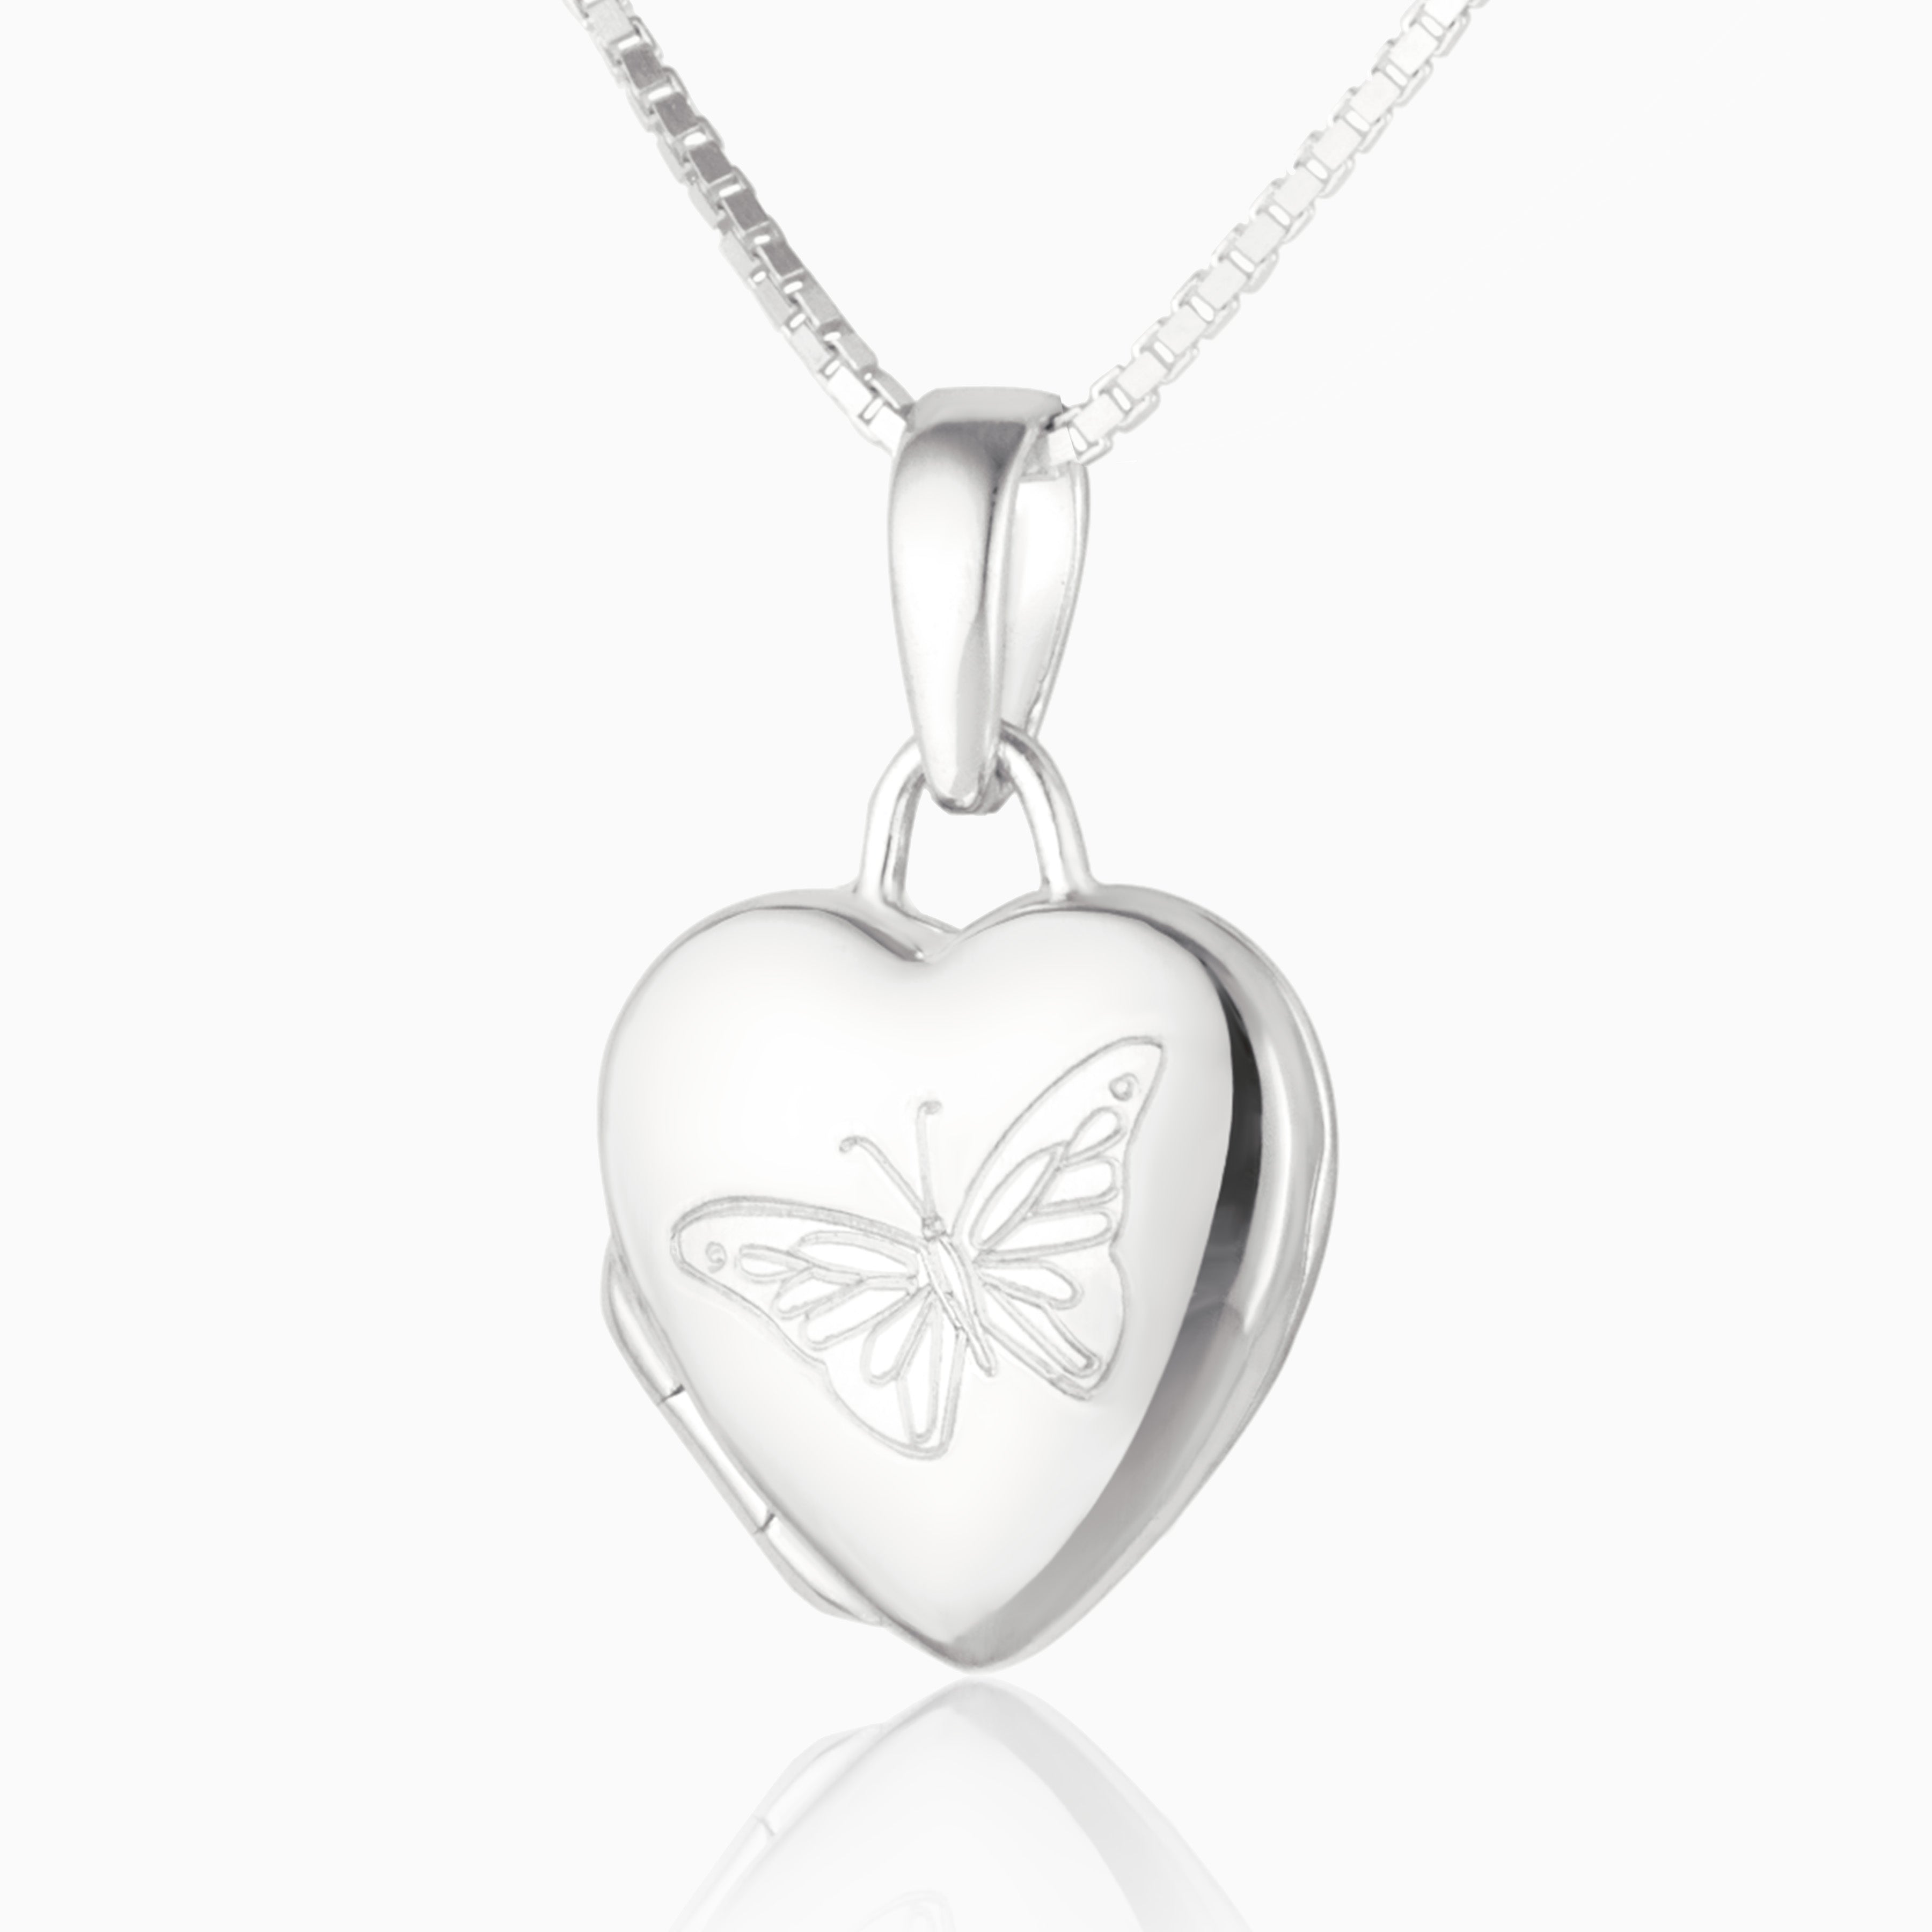 Product title: Tiny Butterfly Locket, product type: Locket